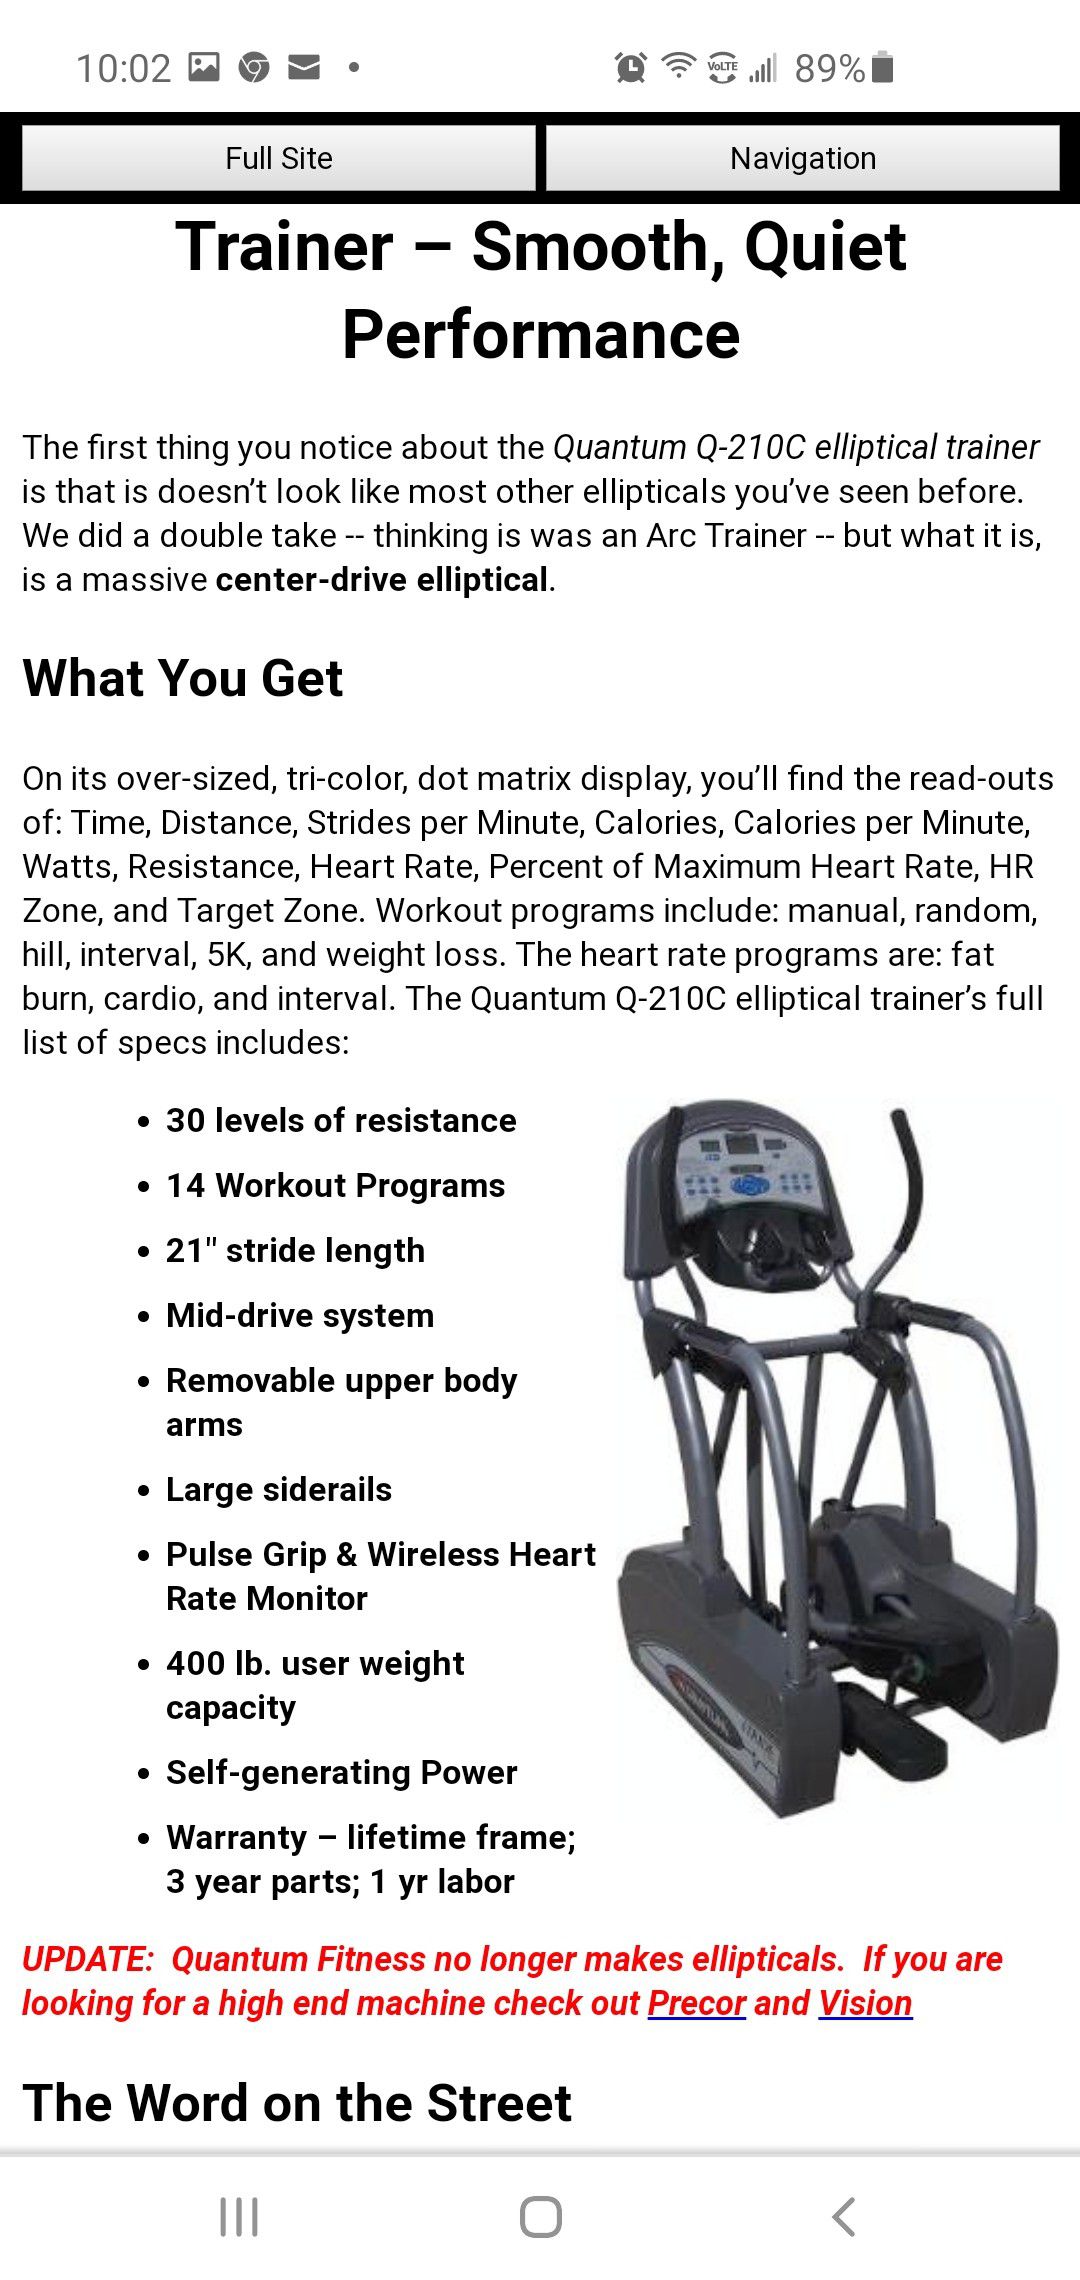 Commercial 400lb weight capacity Elliptical